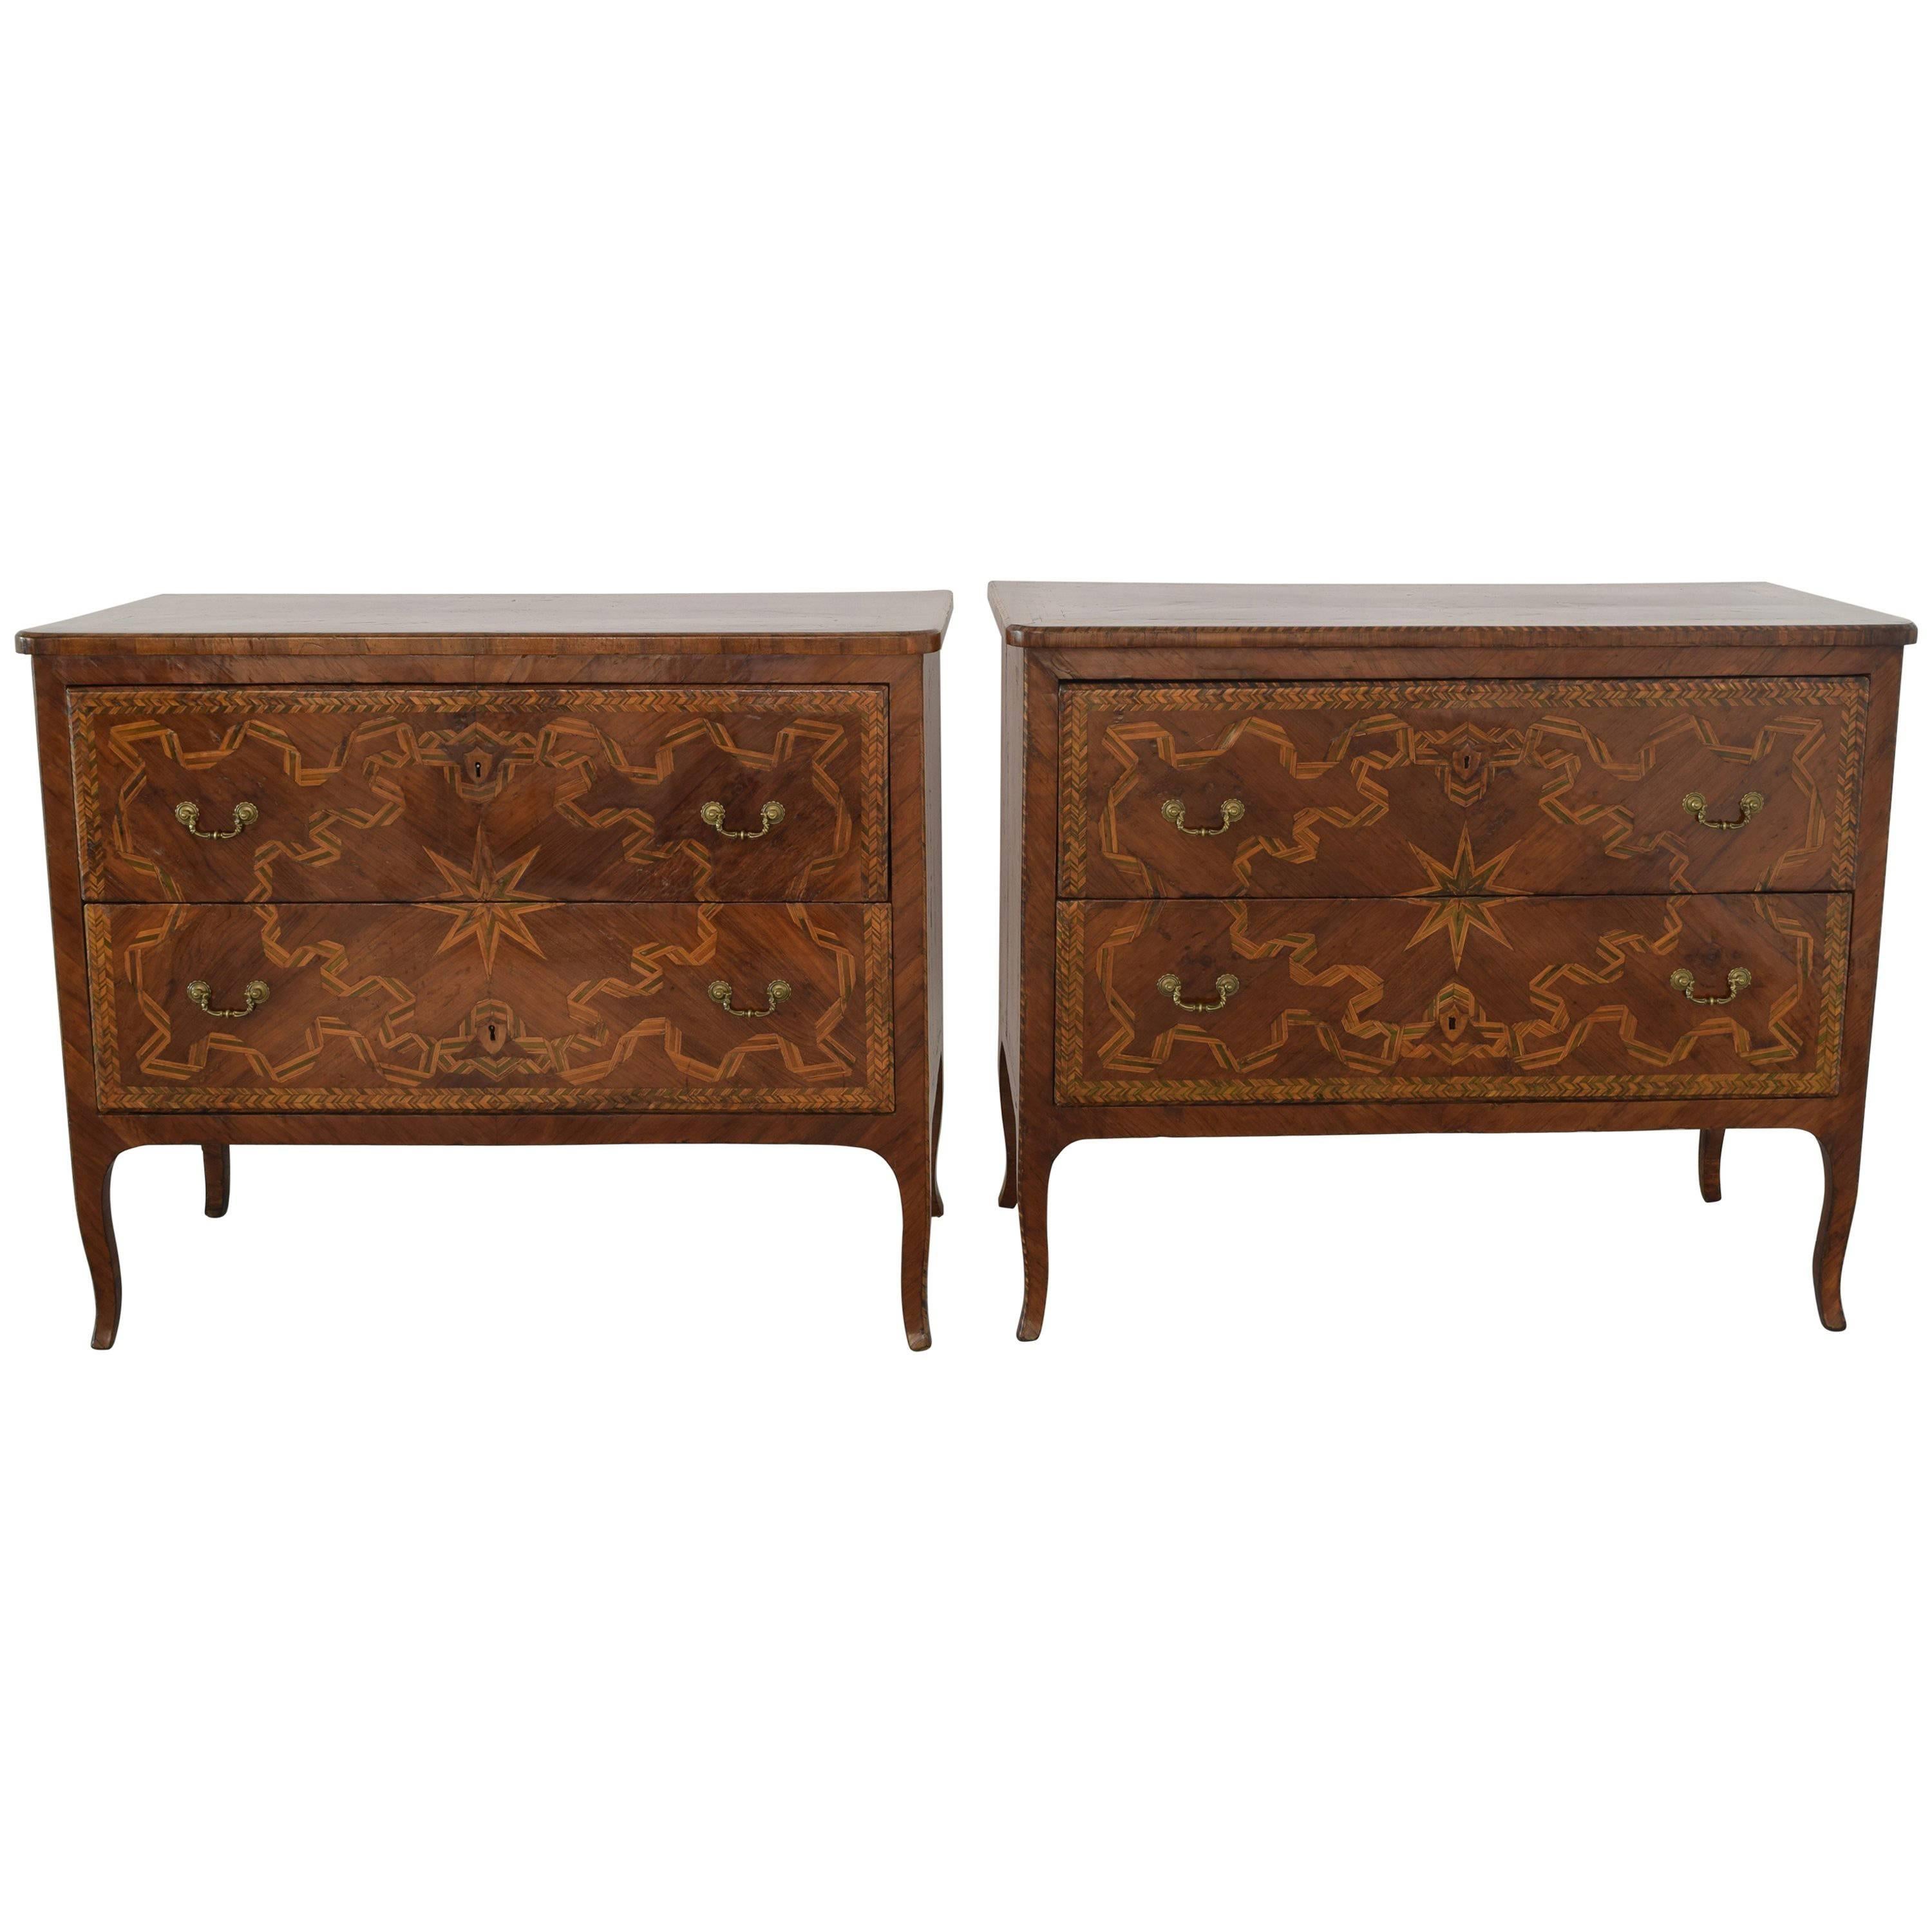 Extraordinary Pair of Italian Walnut & Pearwood Marquetry Two-Drawer Commodes